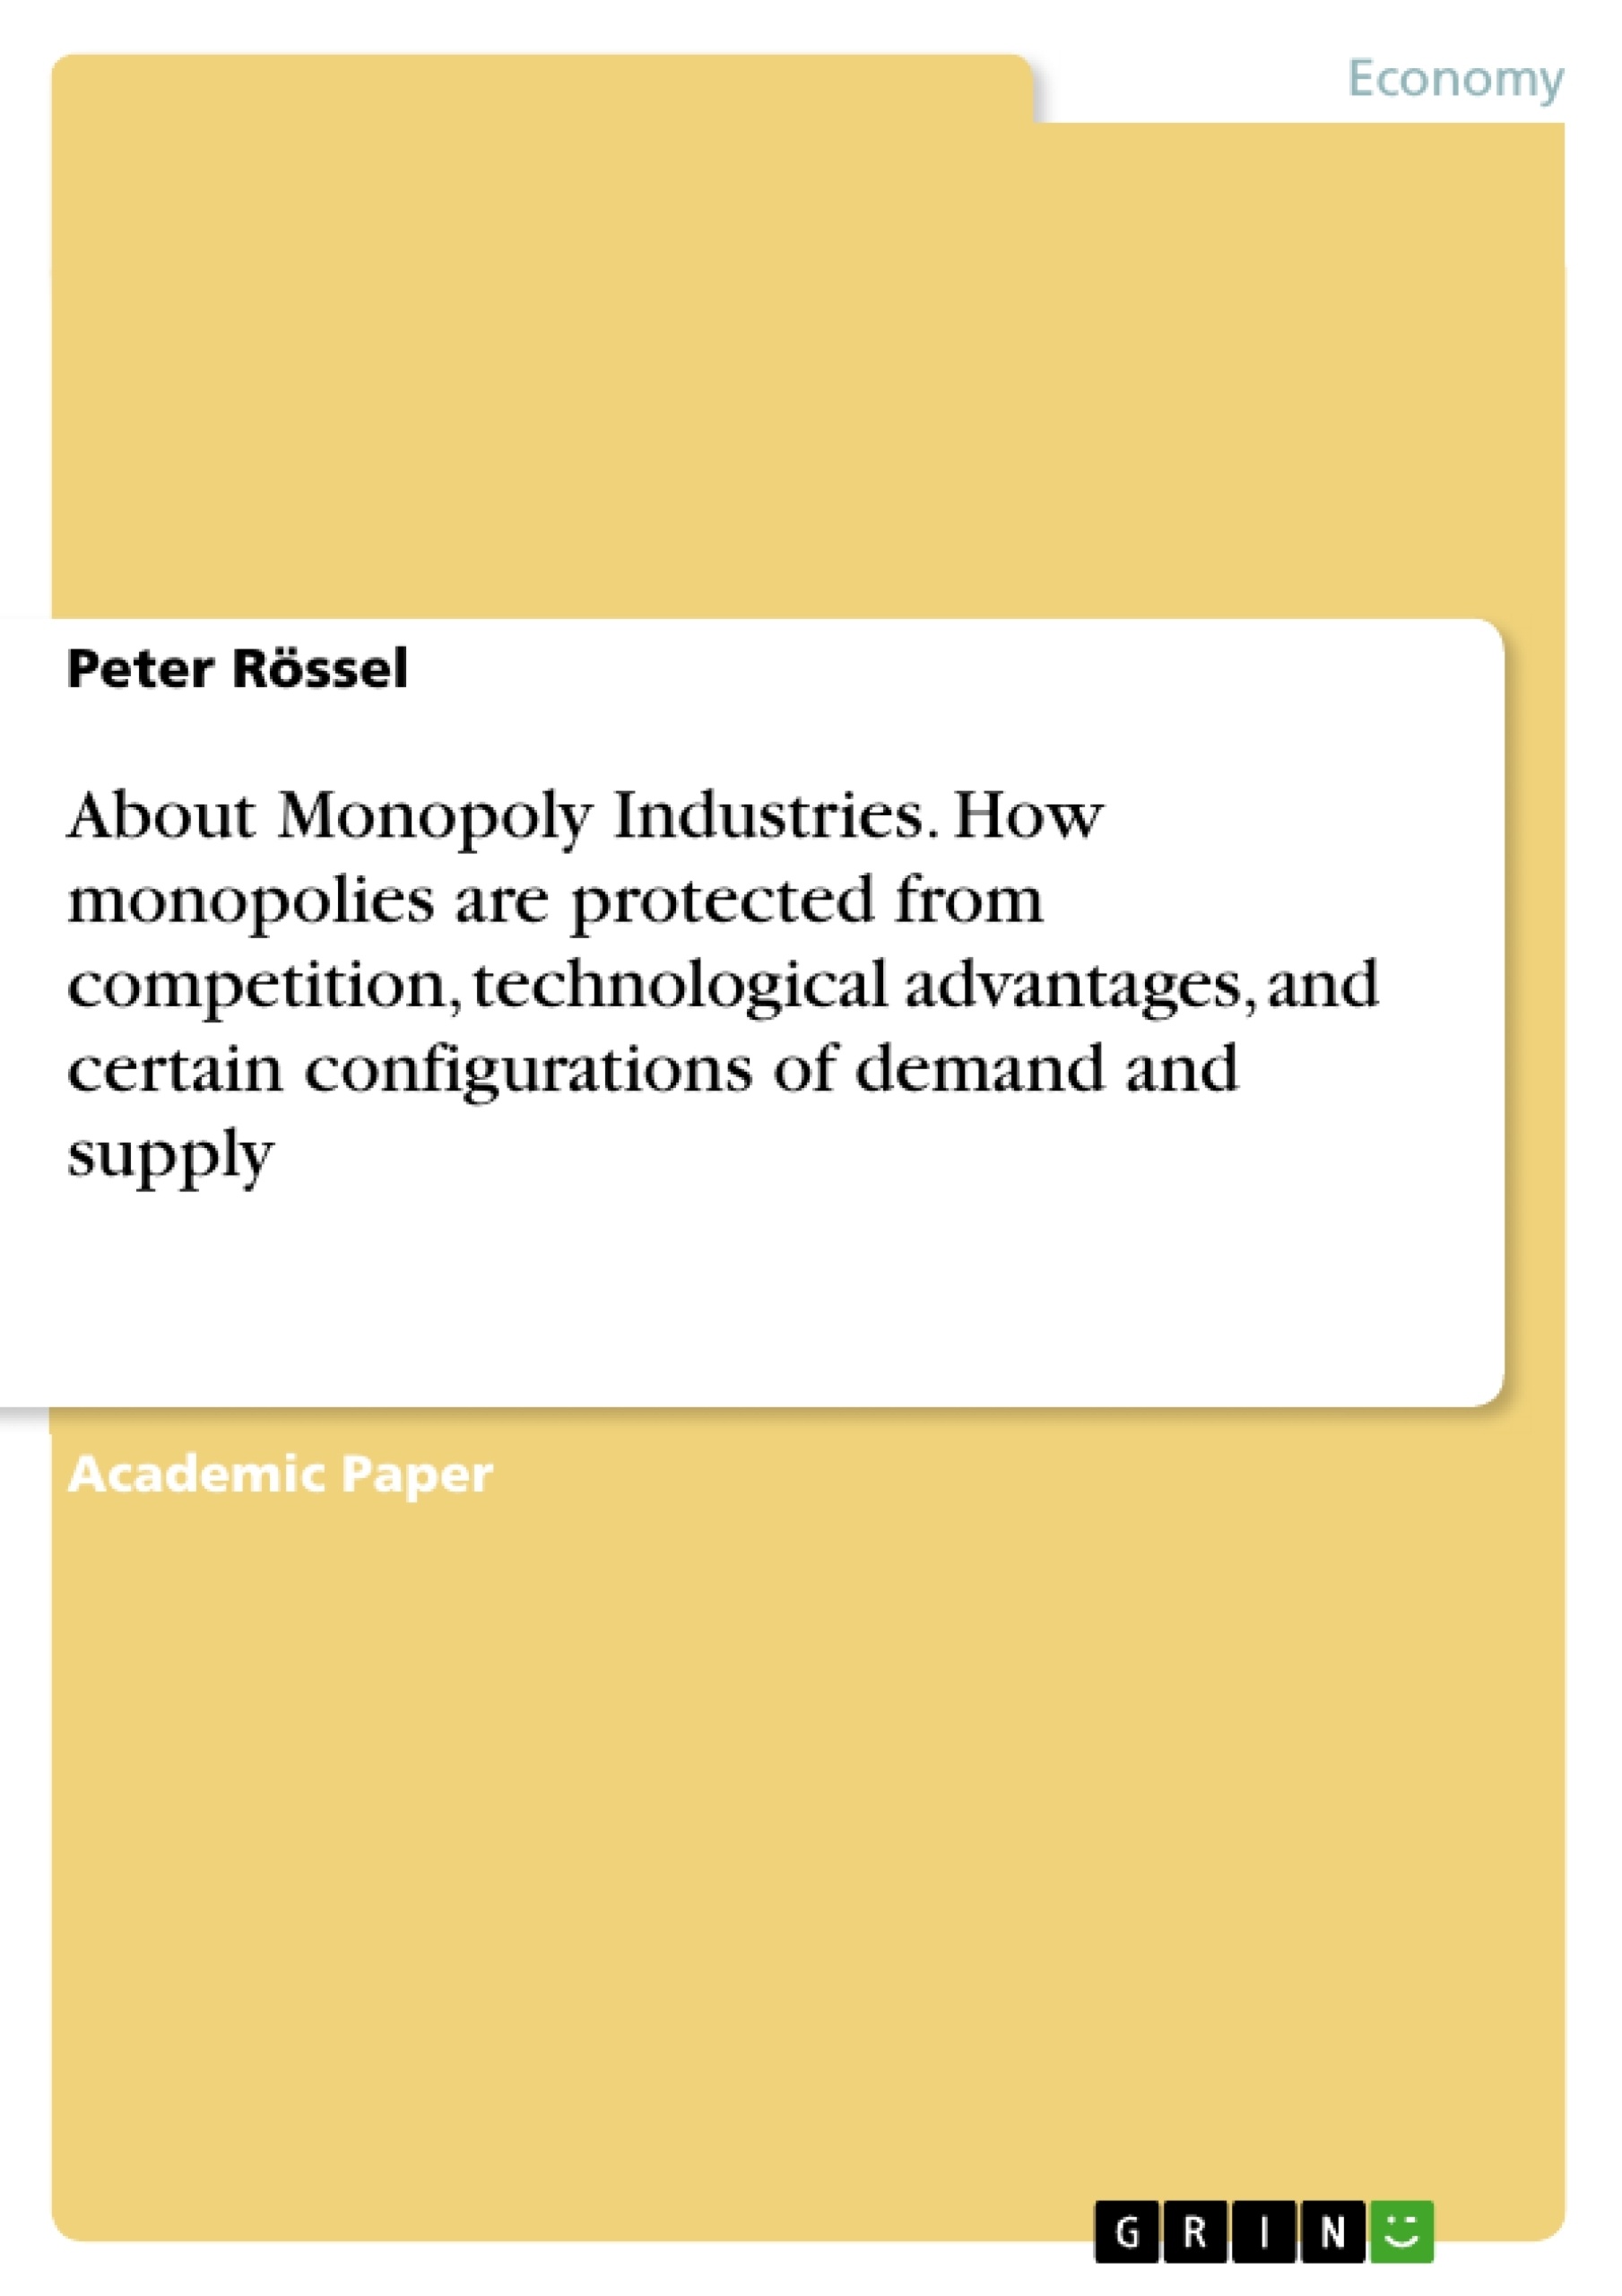 Título: About Monopoly Industries. How monopolies are protected from competition, technological advantages, and certain configurations of demand and supply